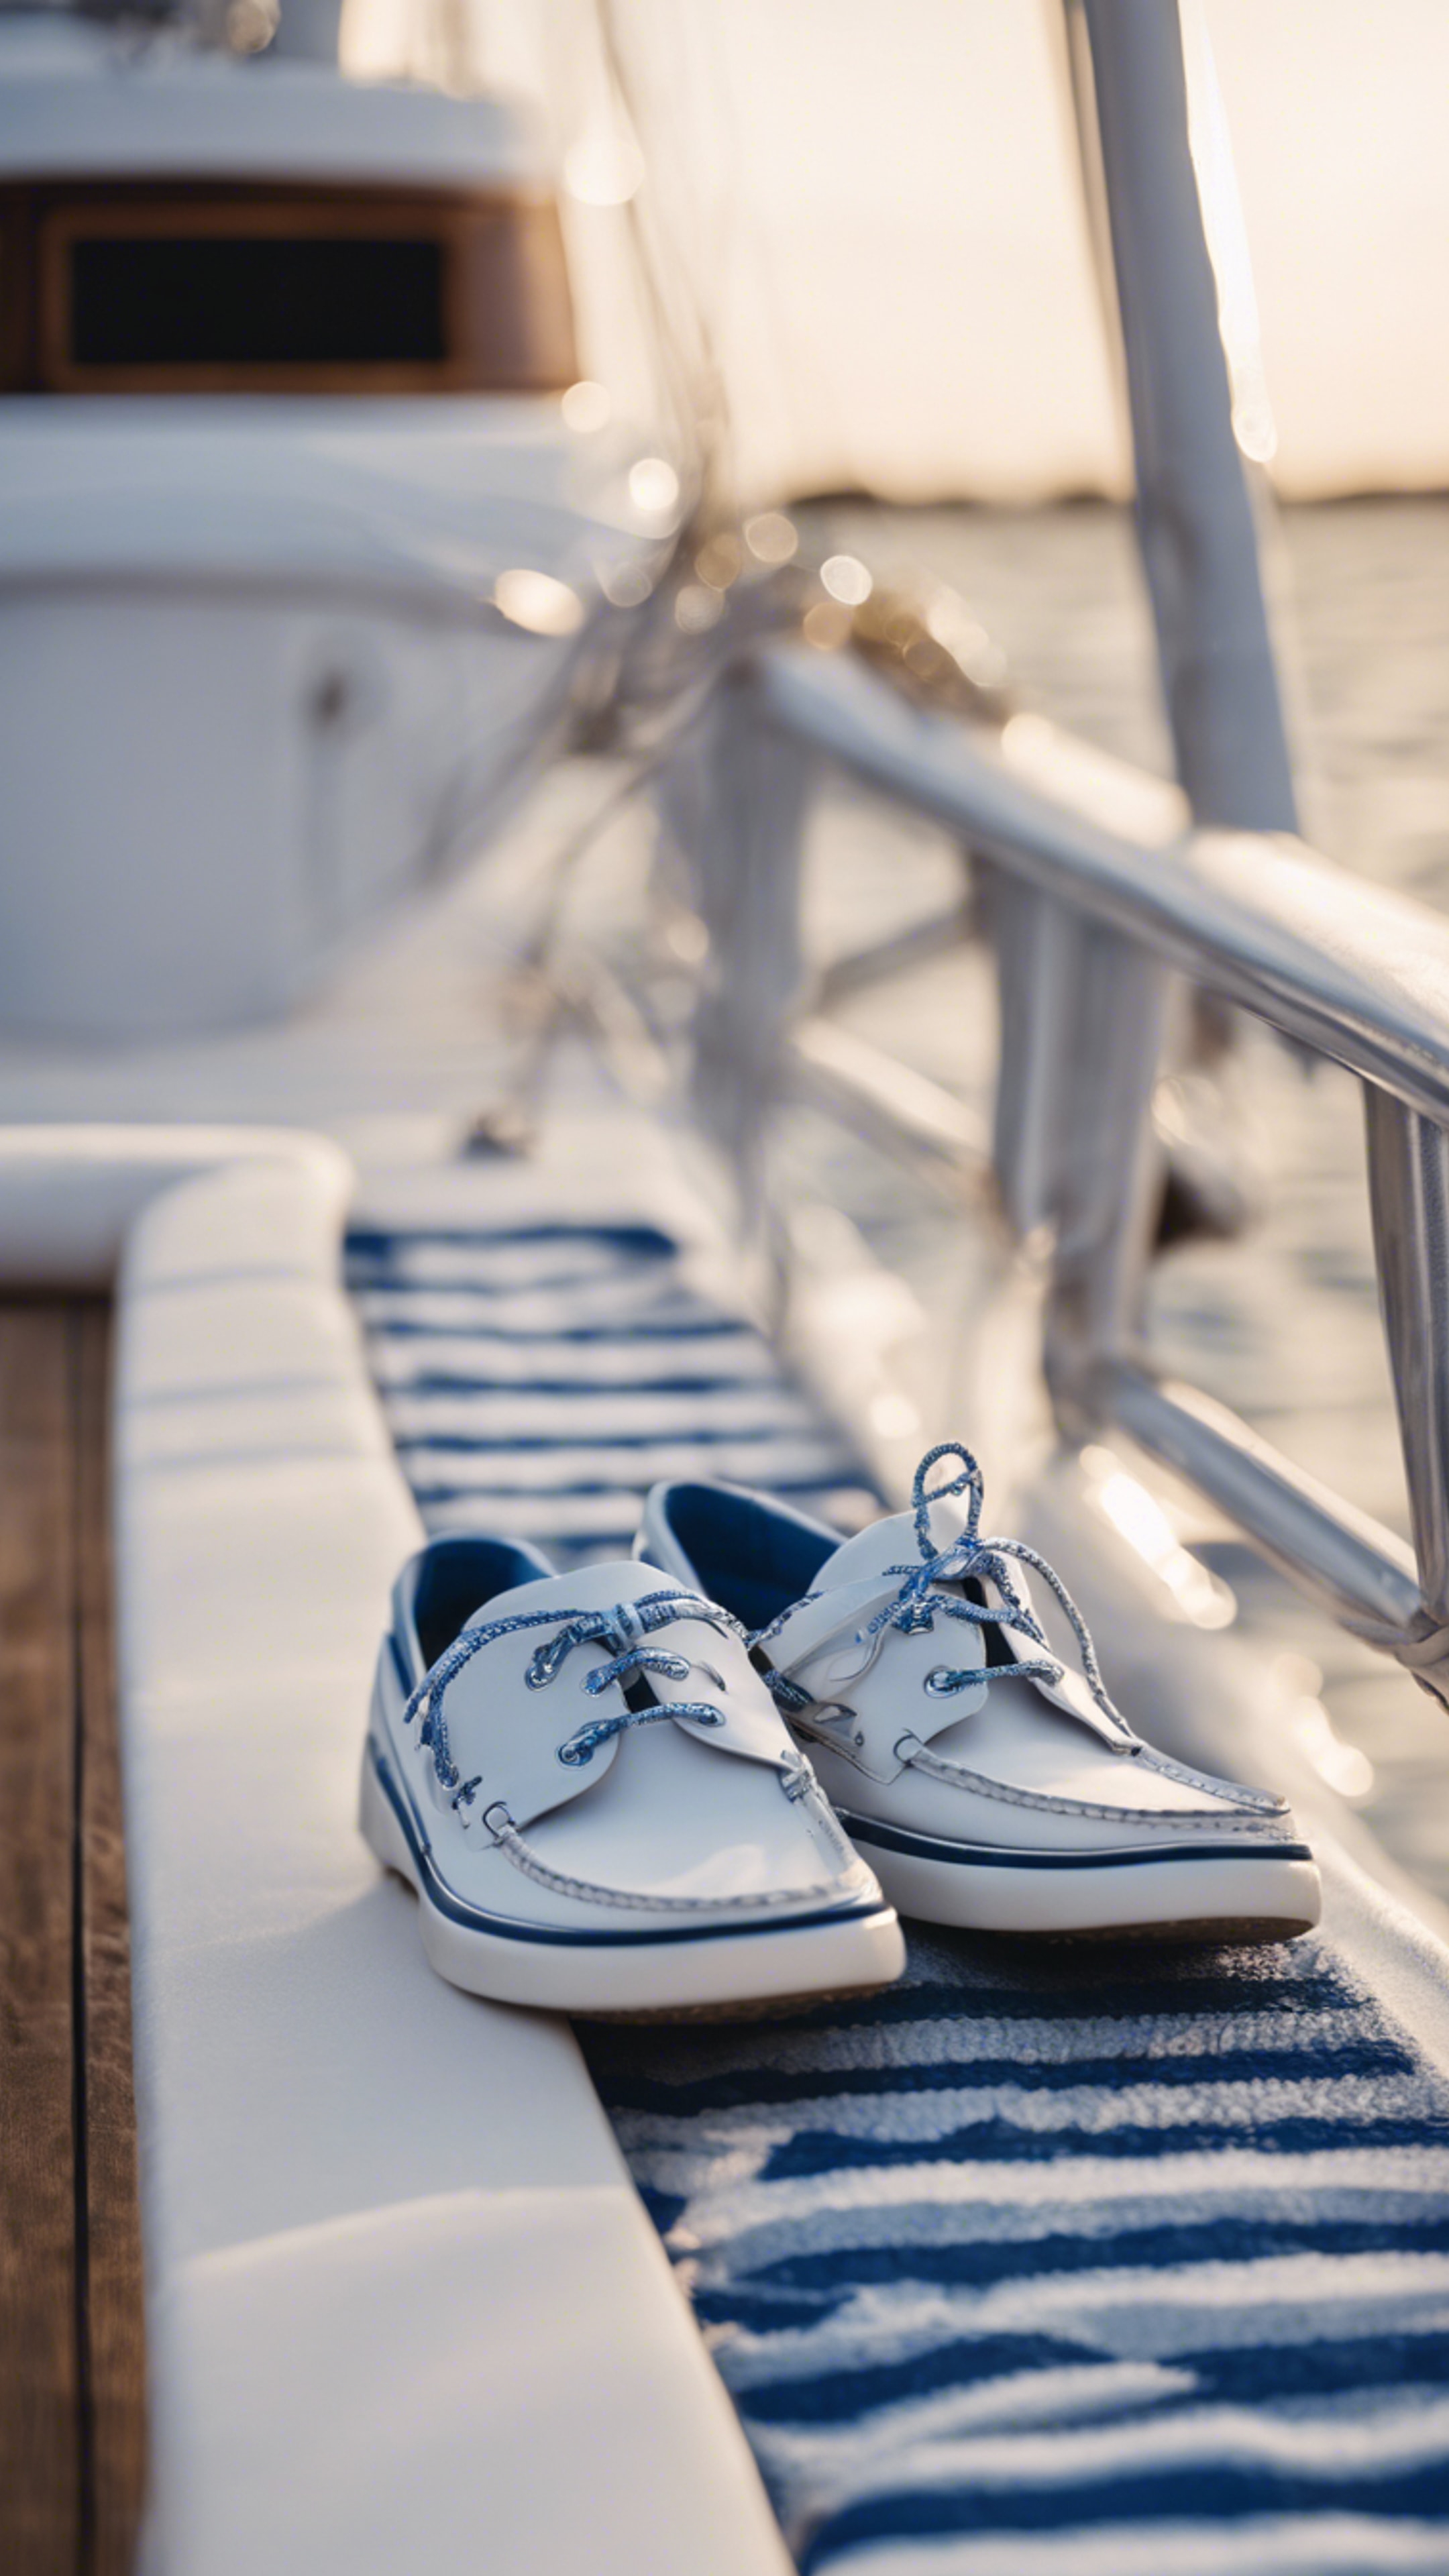 A pair of blue and white boat shoes resting on a yacht deck, reflecting preppy fashion. Tapeta[e5e4a620cbd541dd8bee]